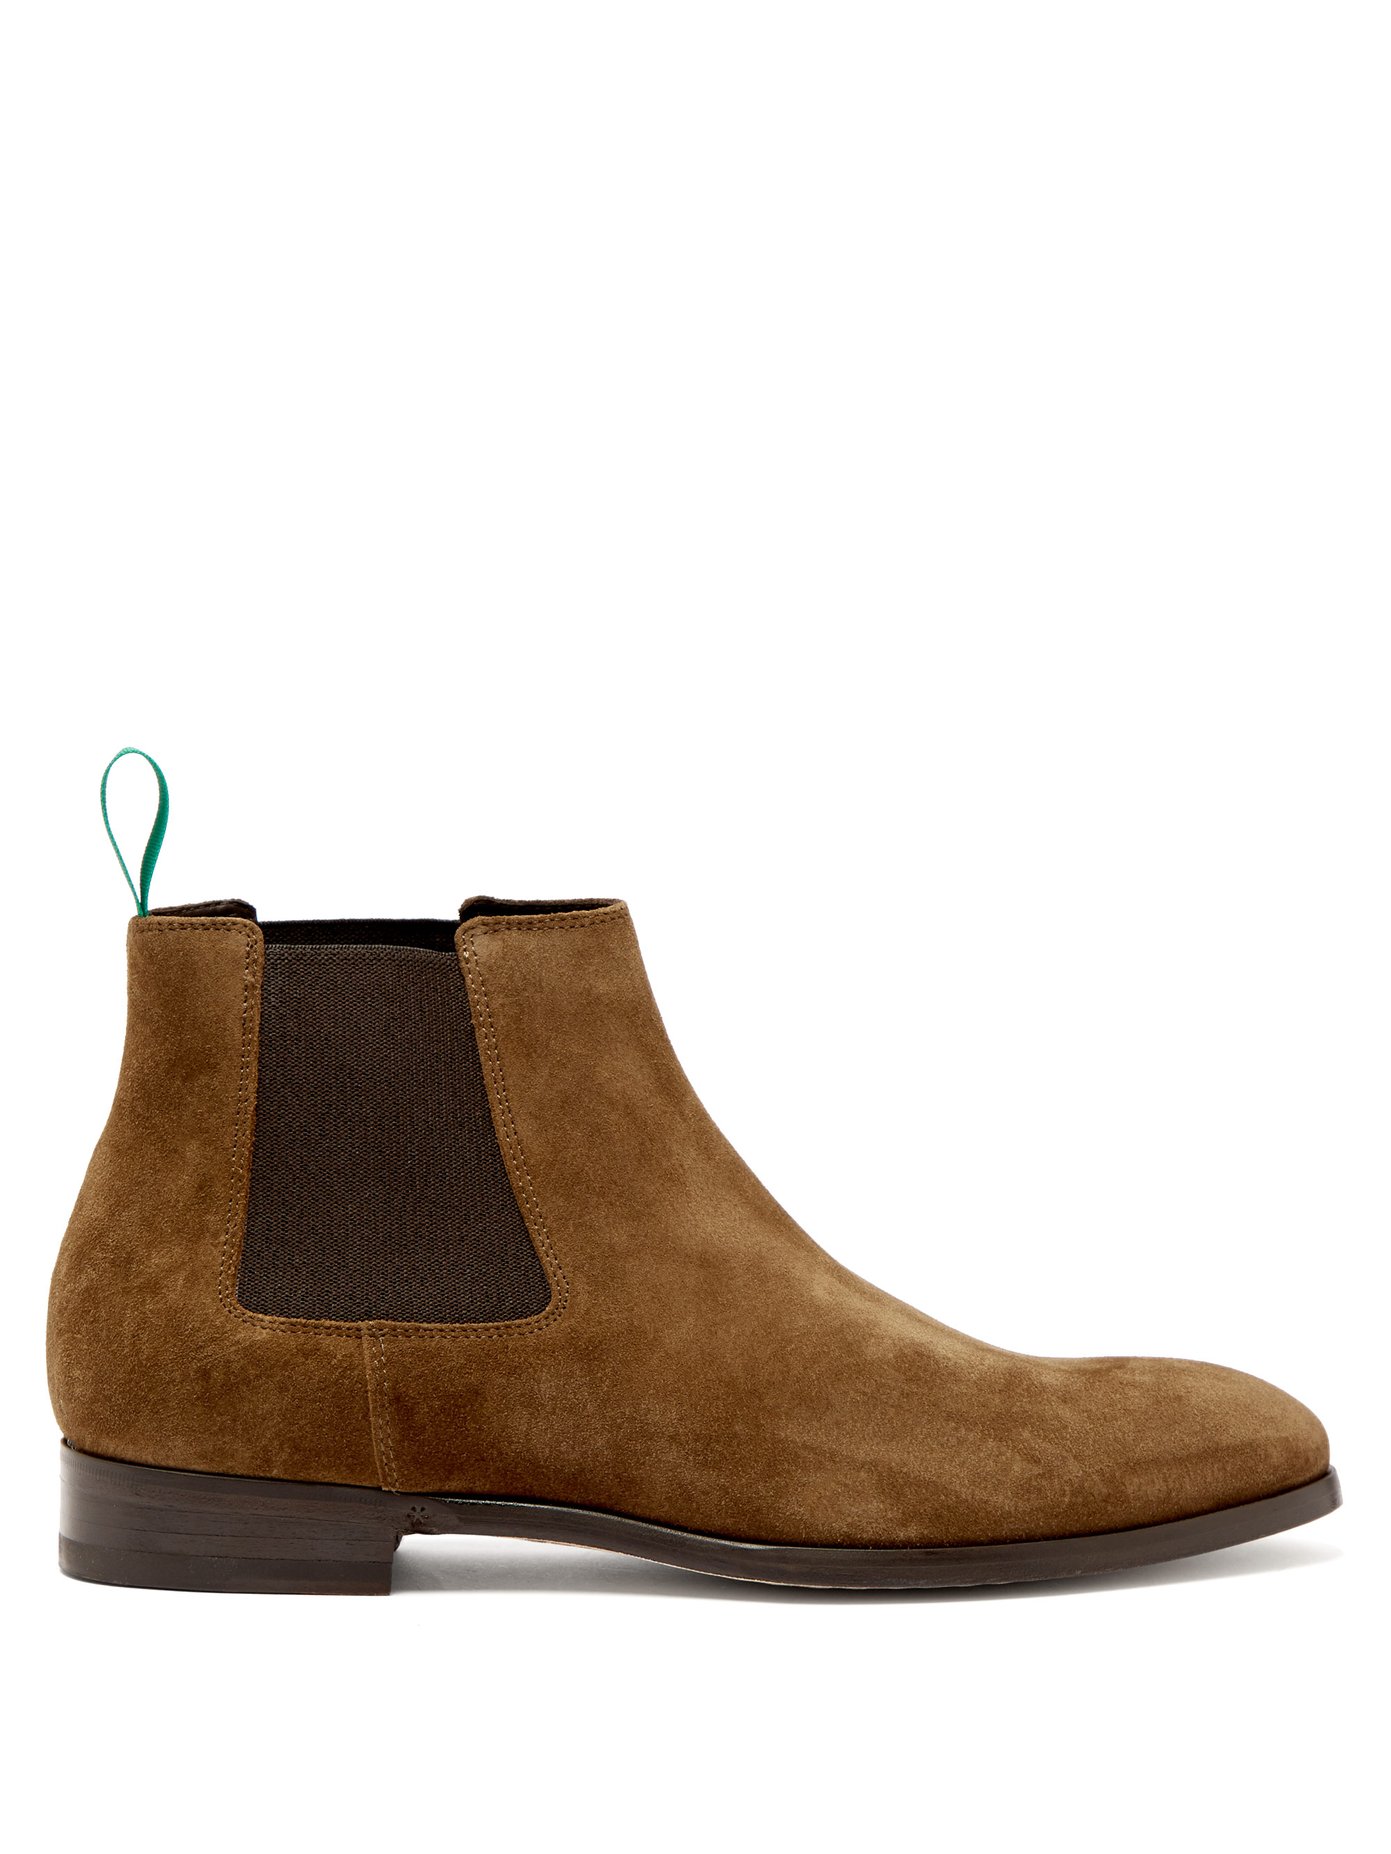 Suede Chelsea boots | Paul Smith 